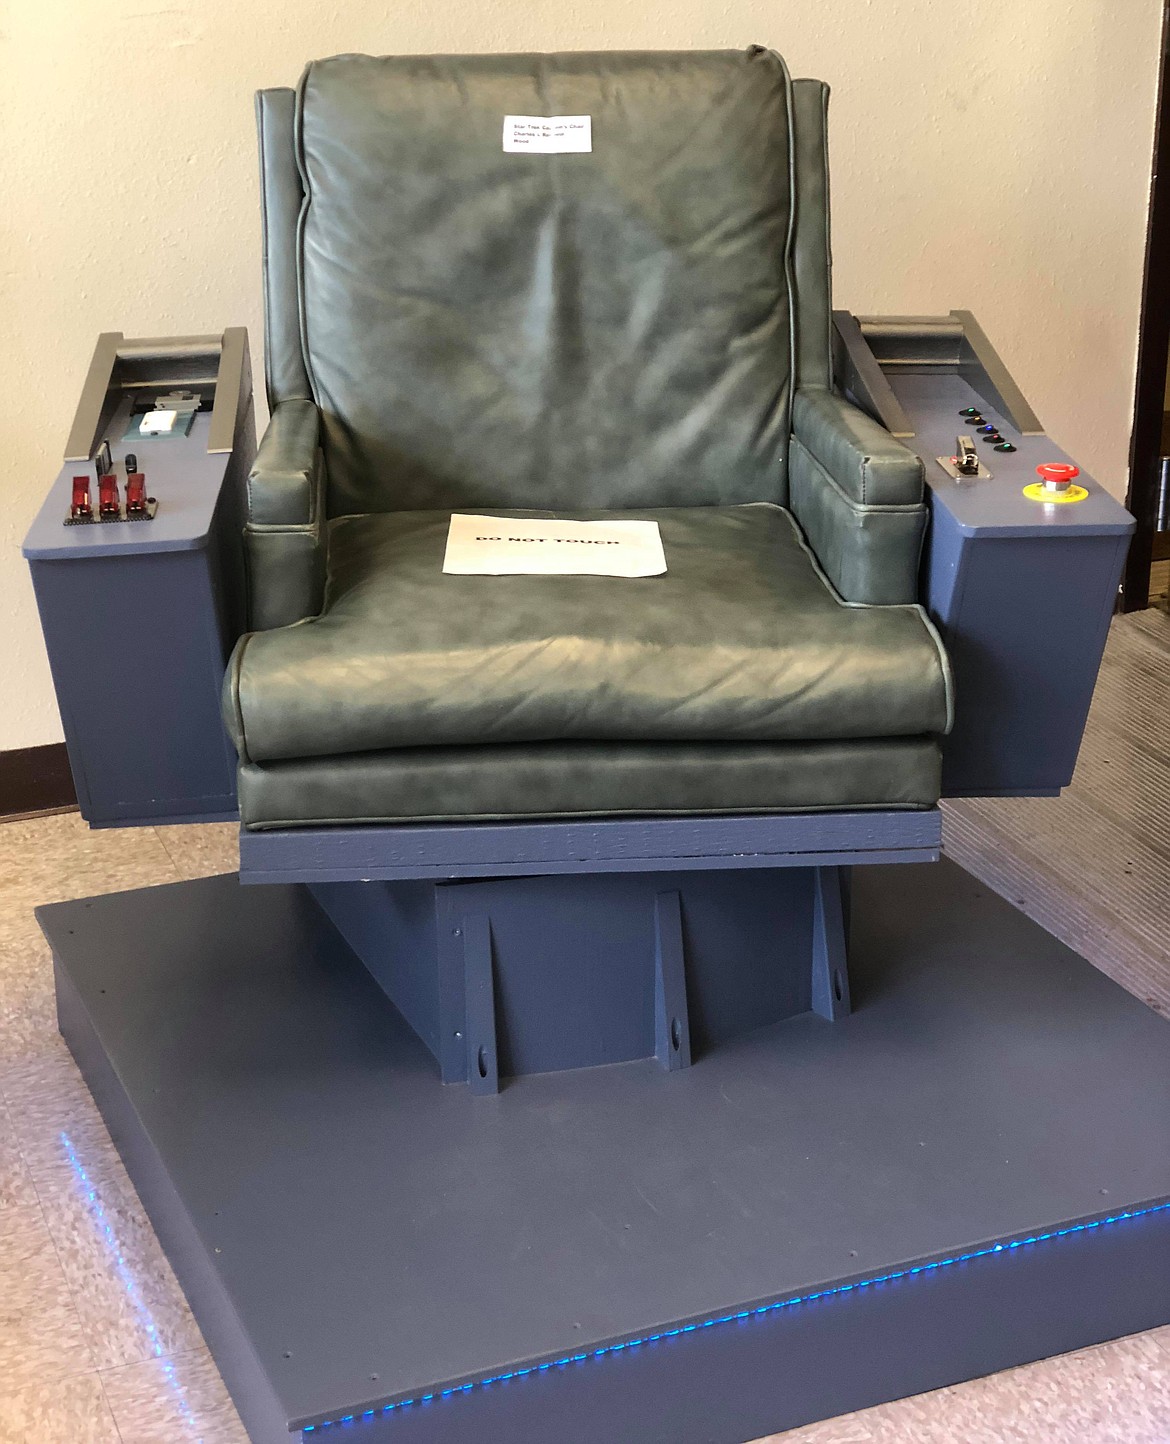 Charles L Rehbein created a life-sized Star Trek captains chair for the exhibit.